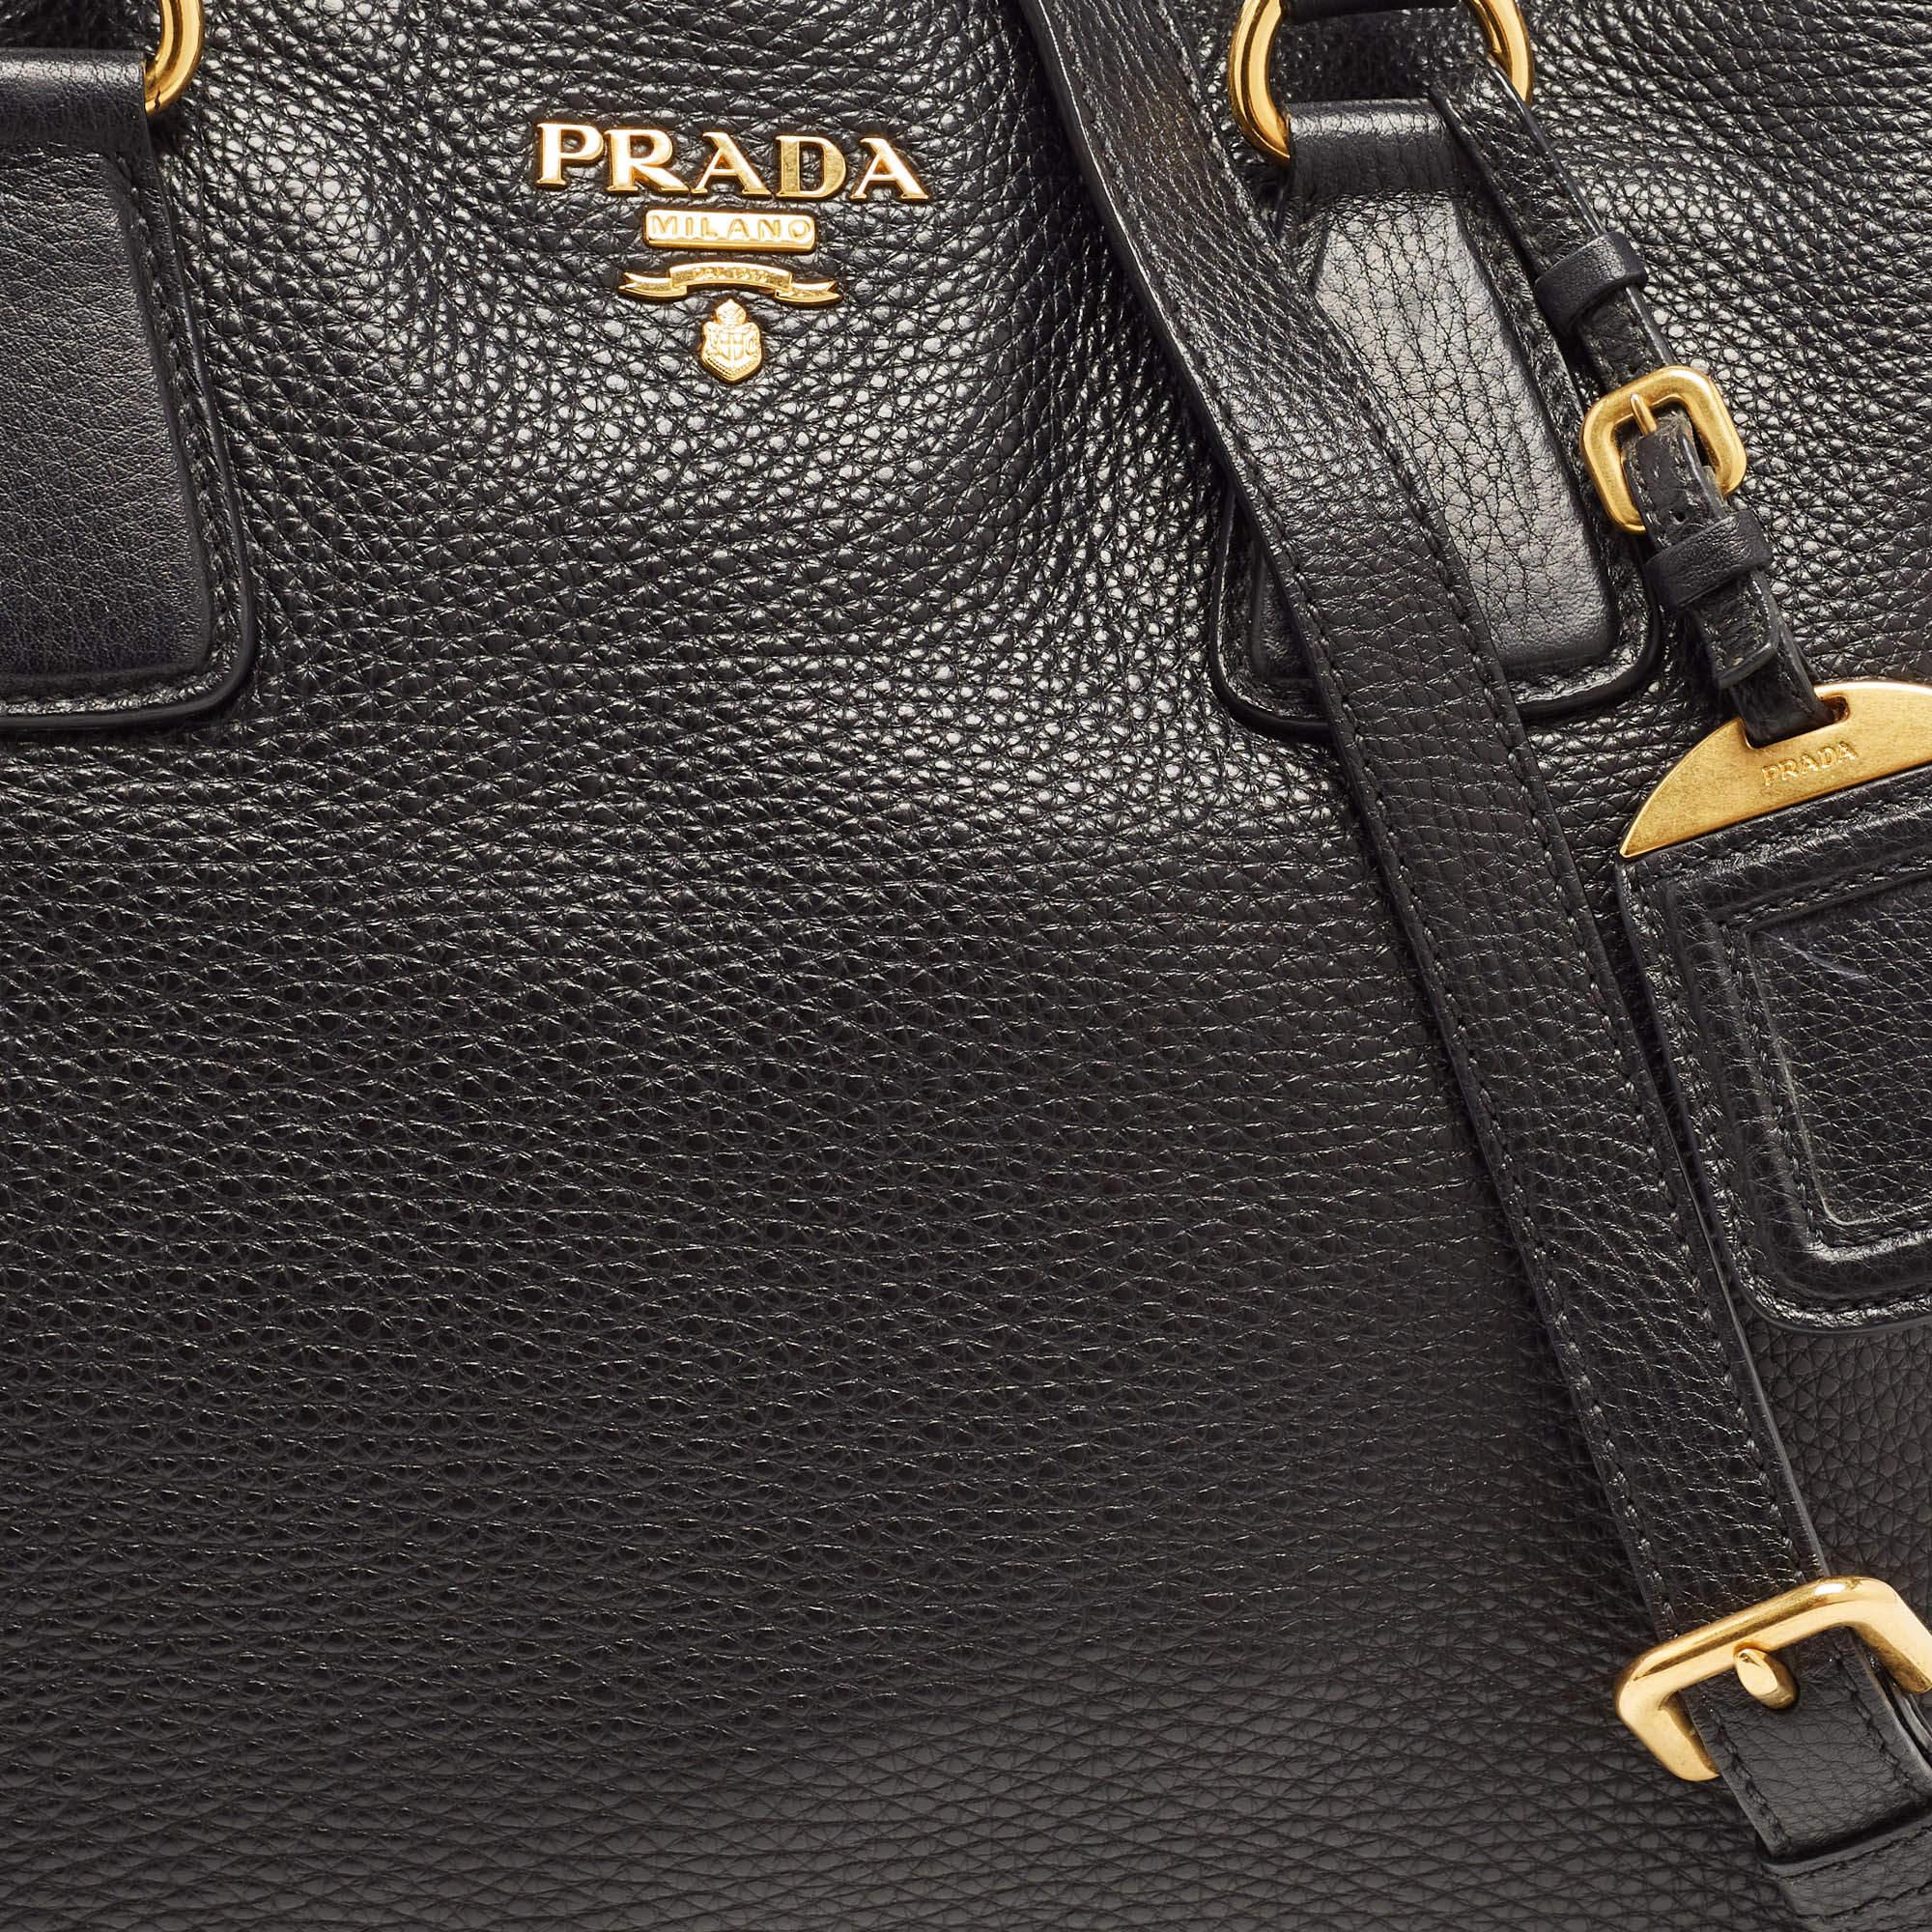 Indulge in timeless luxury with this Prada tote for women. Meticulously crafted, this exquisite accessory embodies elegance, functionality, and style, making it the ultimate companion for every sophisticated woman.

Includes: Detachable Strap